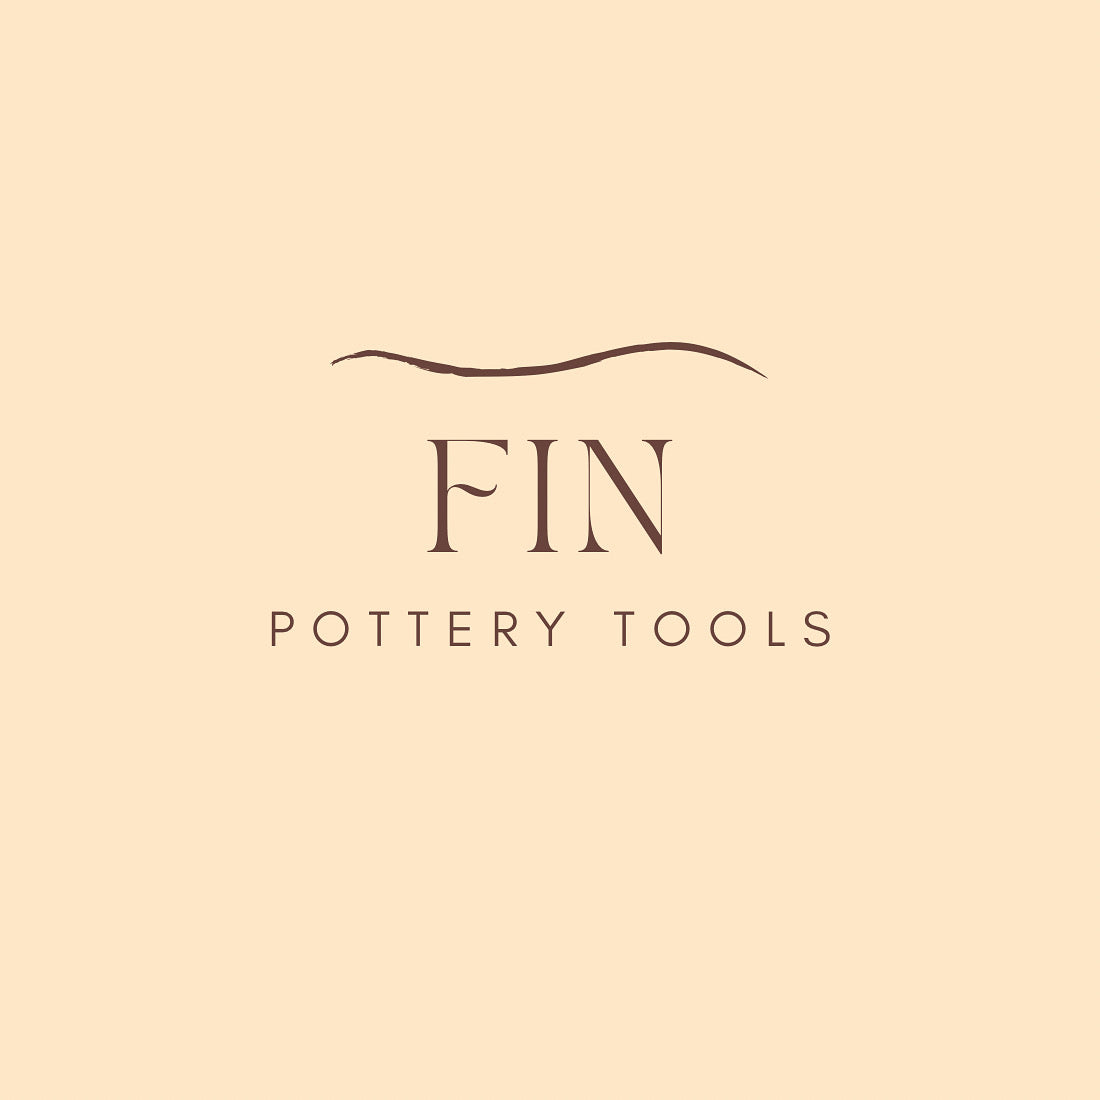 Fin Pottery Tools